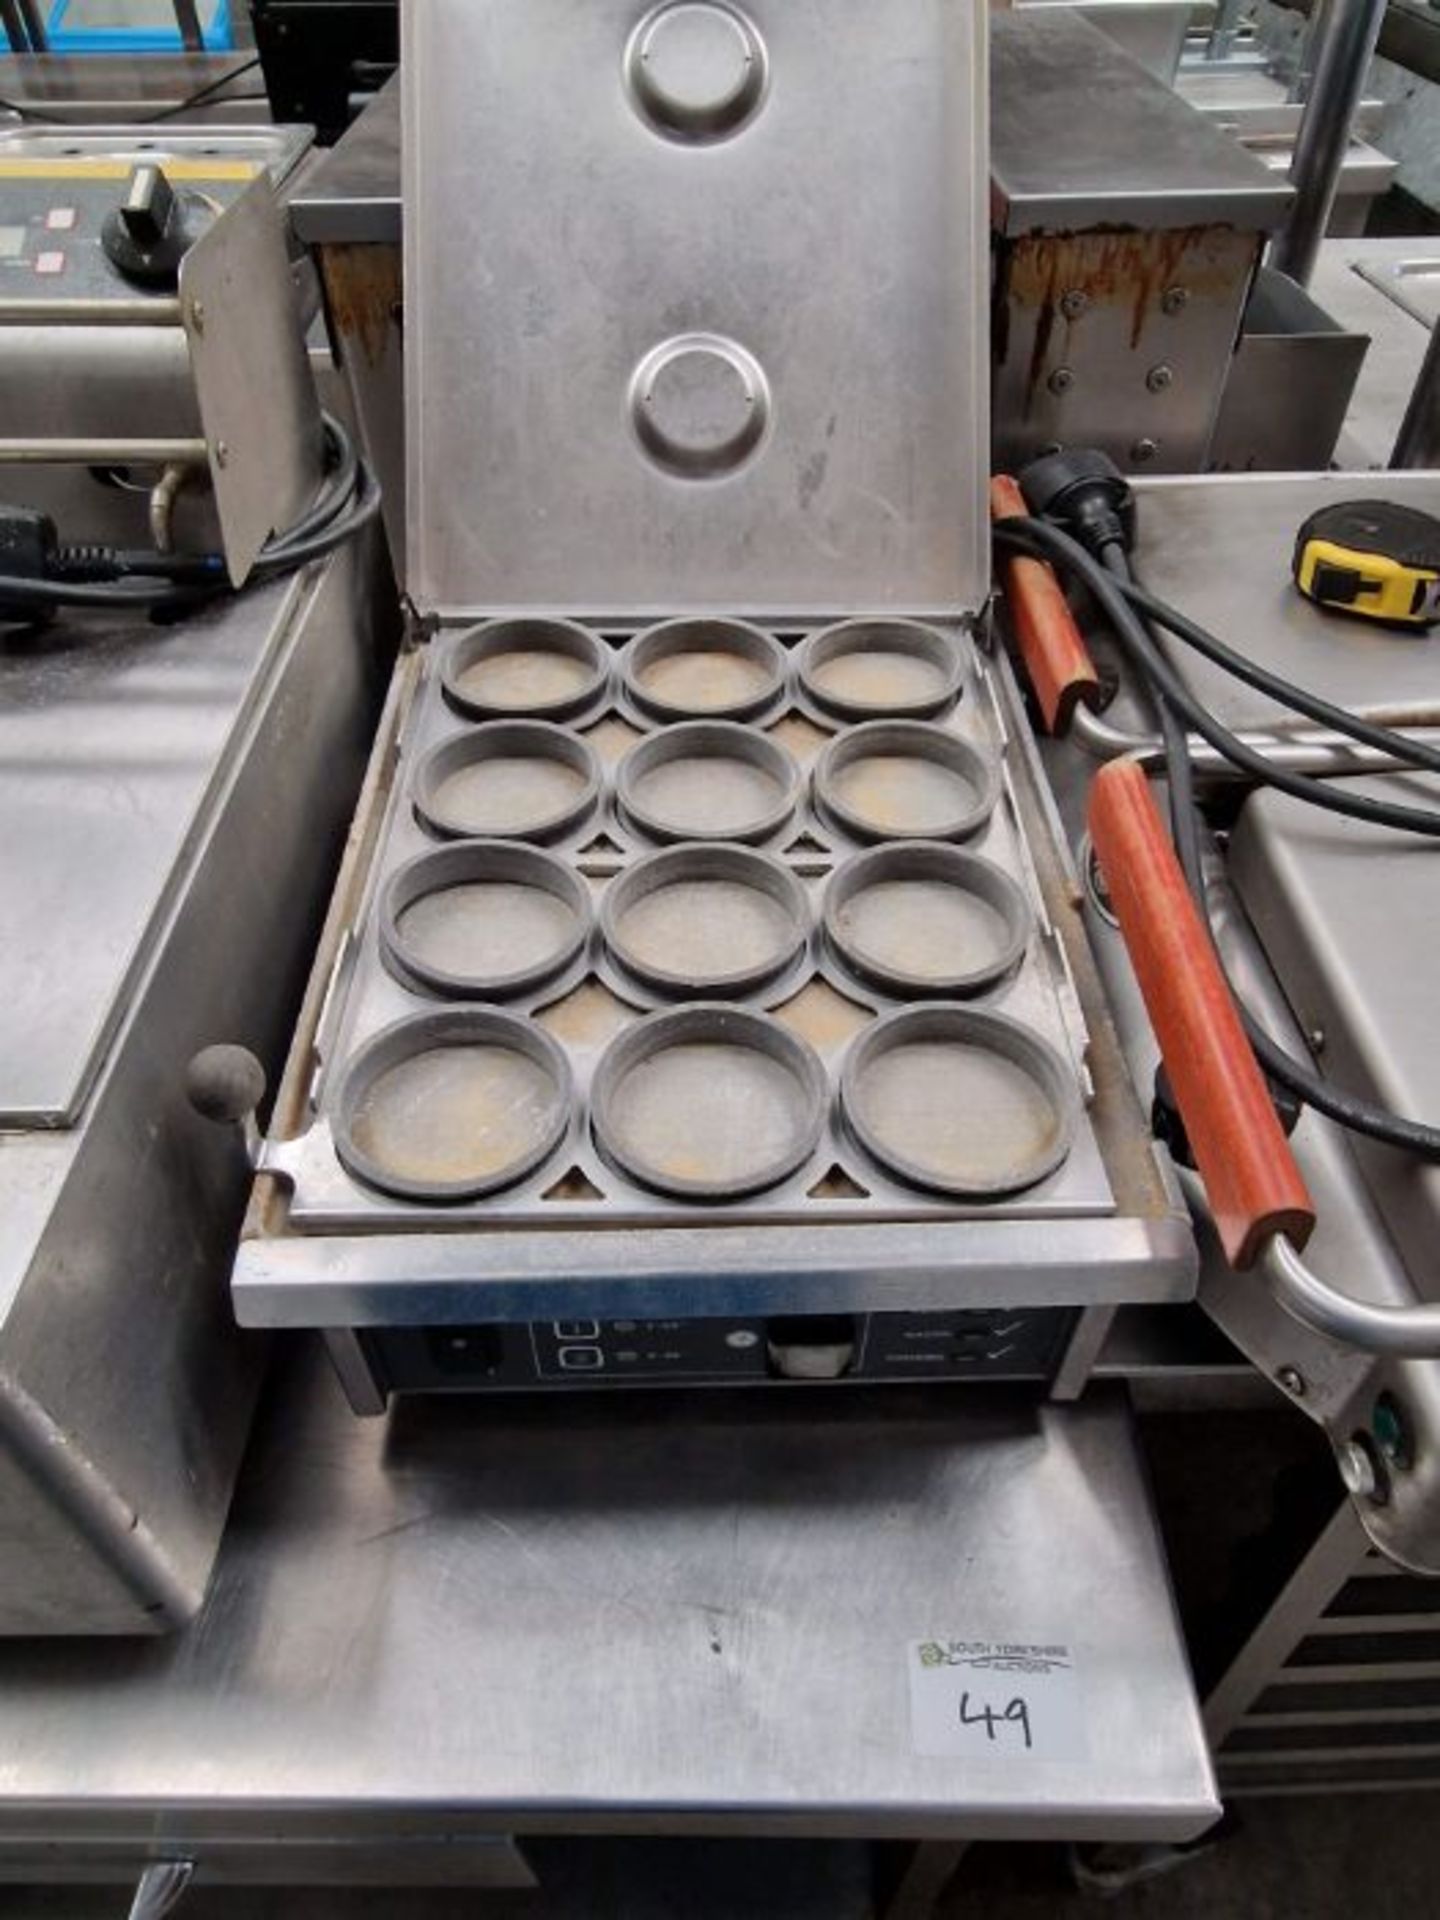 Roundup griddle with egg dividers. - Image 2 of 2